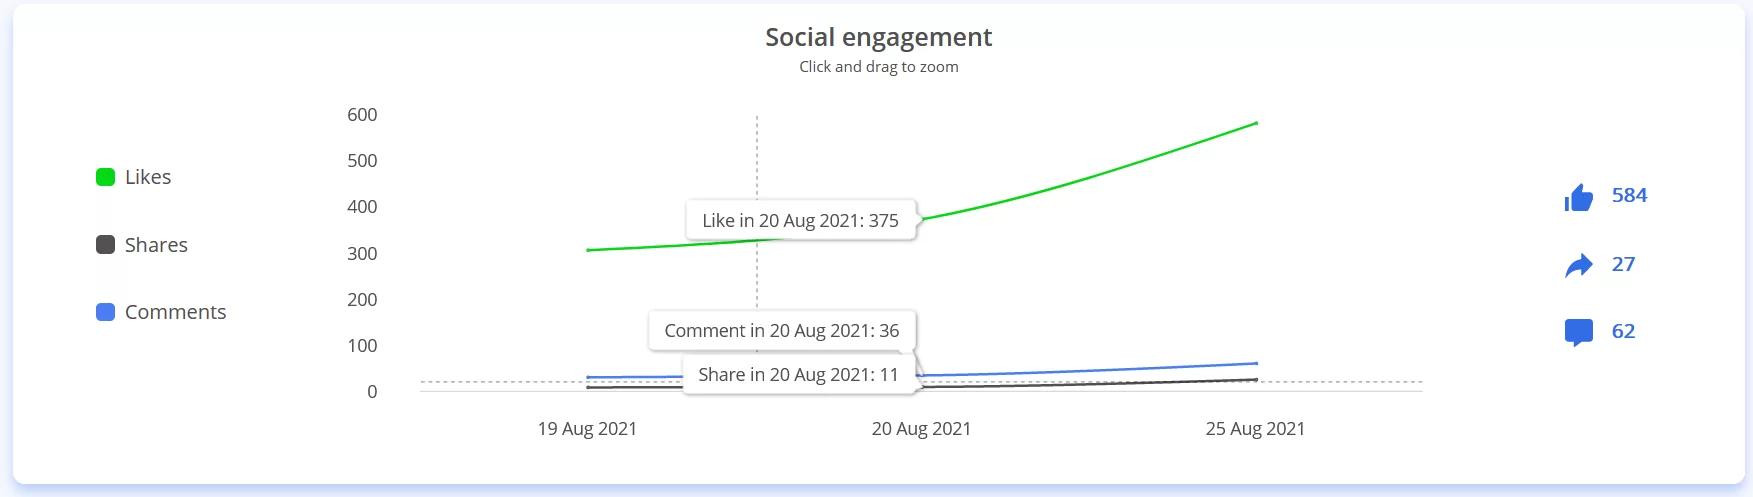 social-ad-engagement-and-impressions